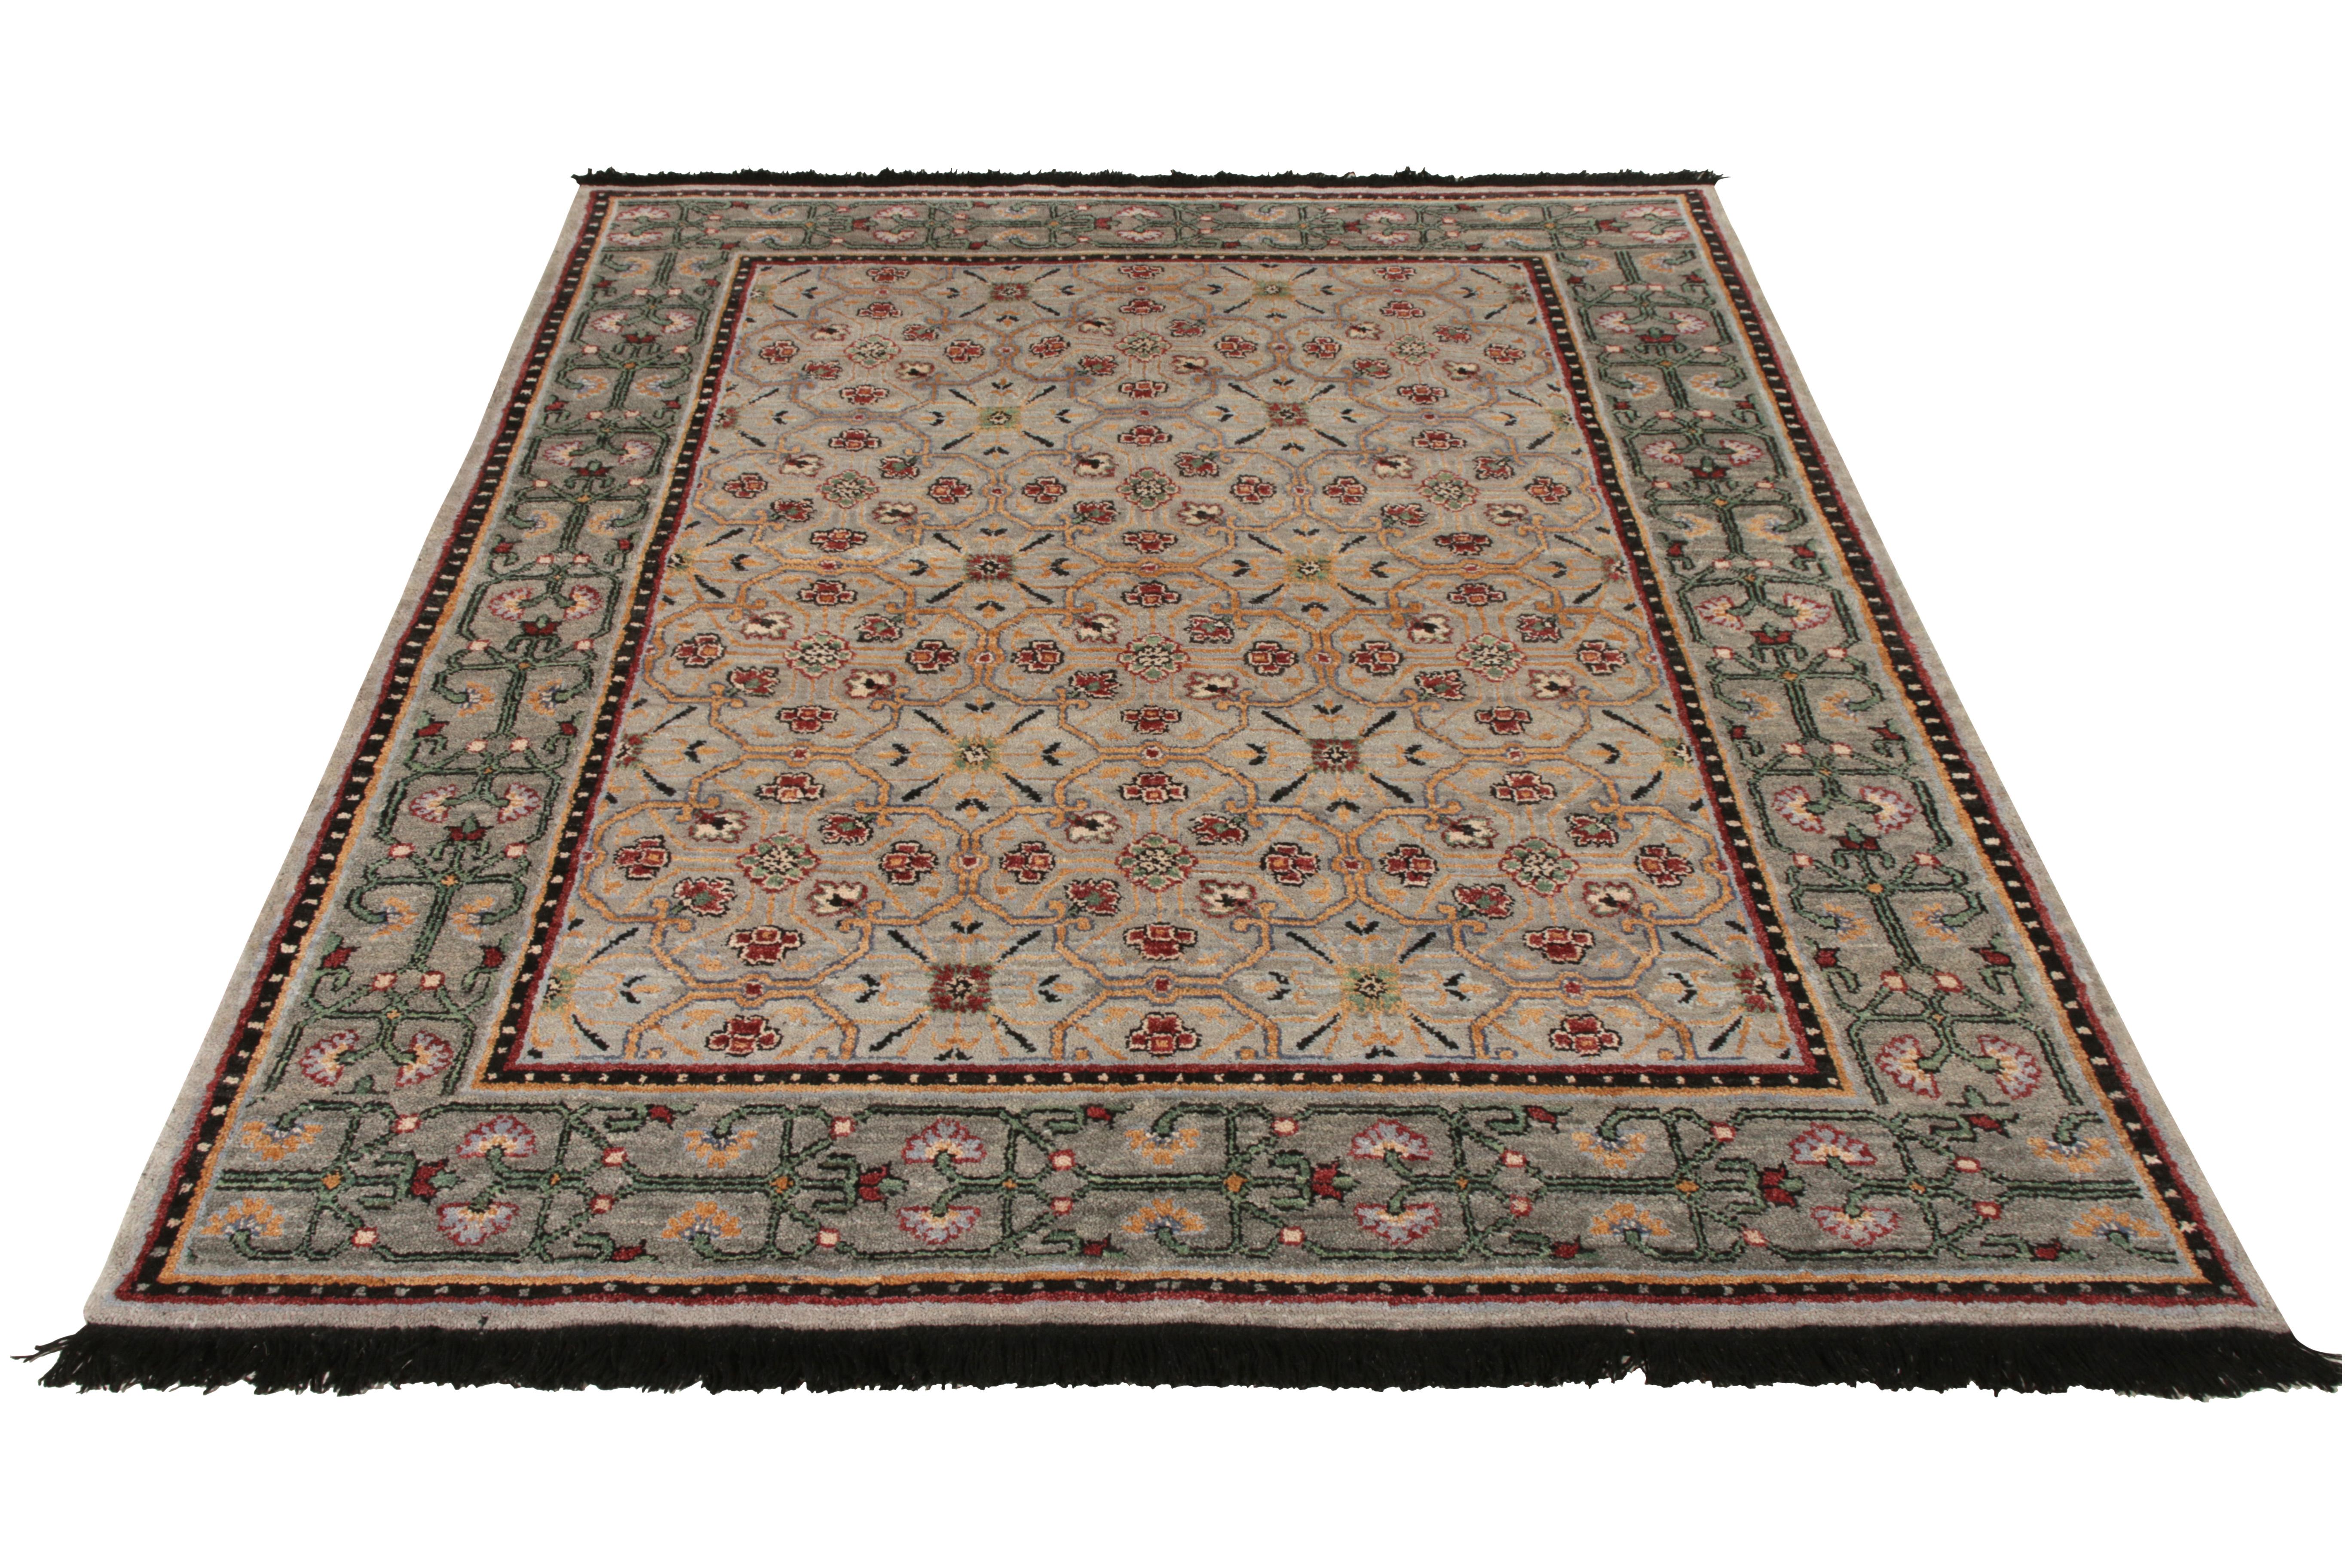 A 6 x 8 ode to celebrated transitional rug styles, from Rug & Kilim’s Burano Collection.

Hand knotted in soft Ghazni wool, enjoying green and blue with pink-red accents throughout all over floral patterns. 

Lending flawless symmetry and